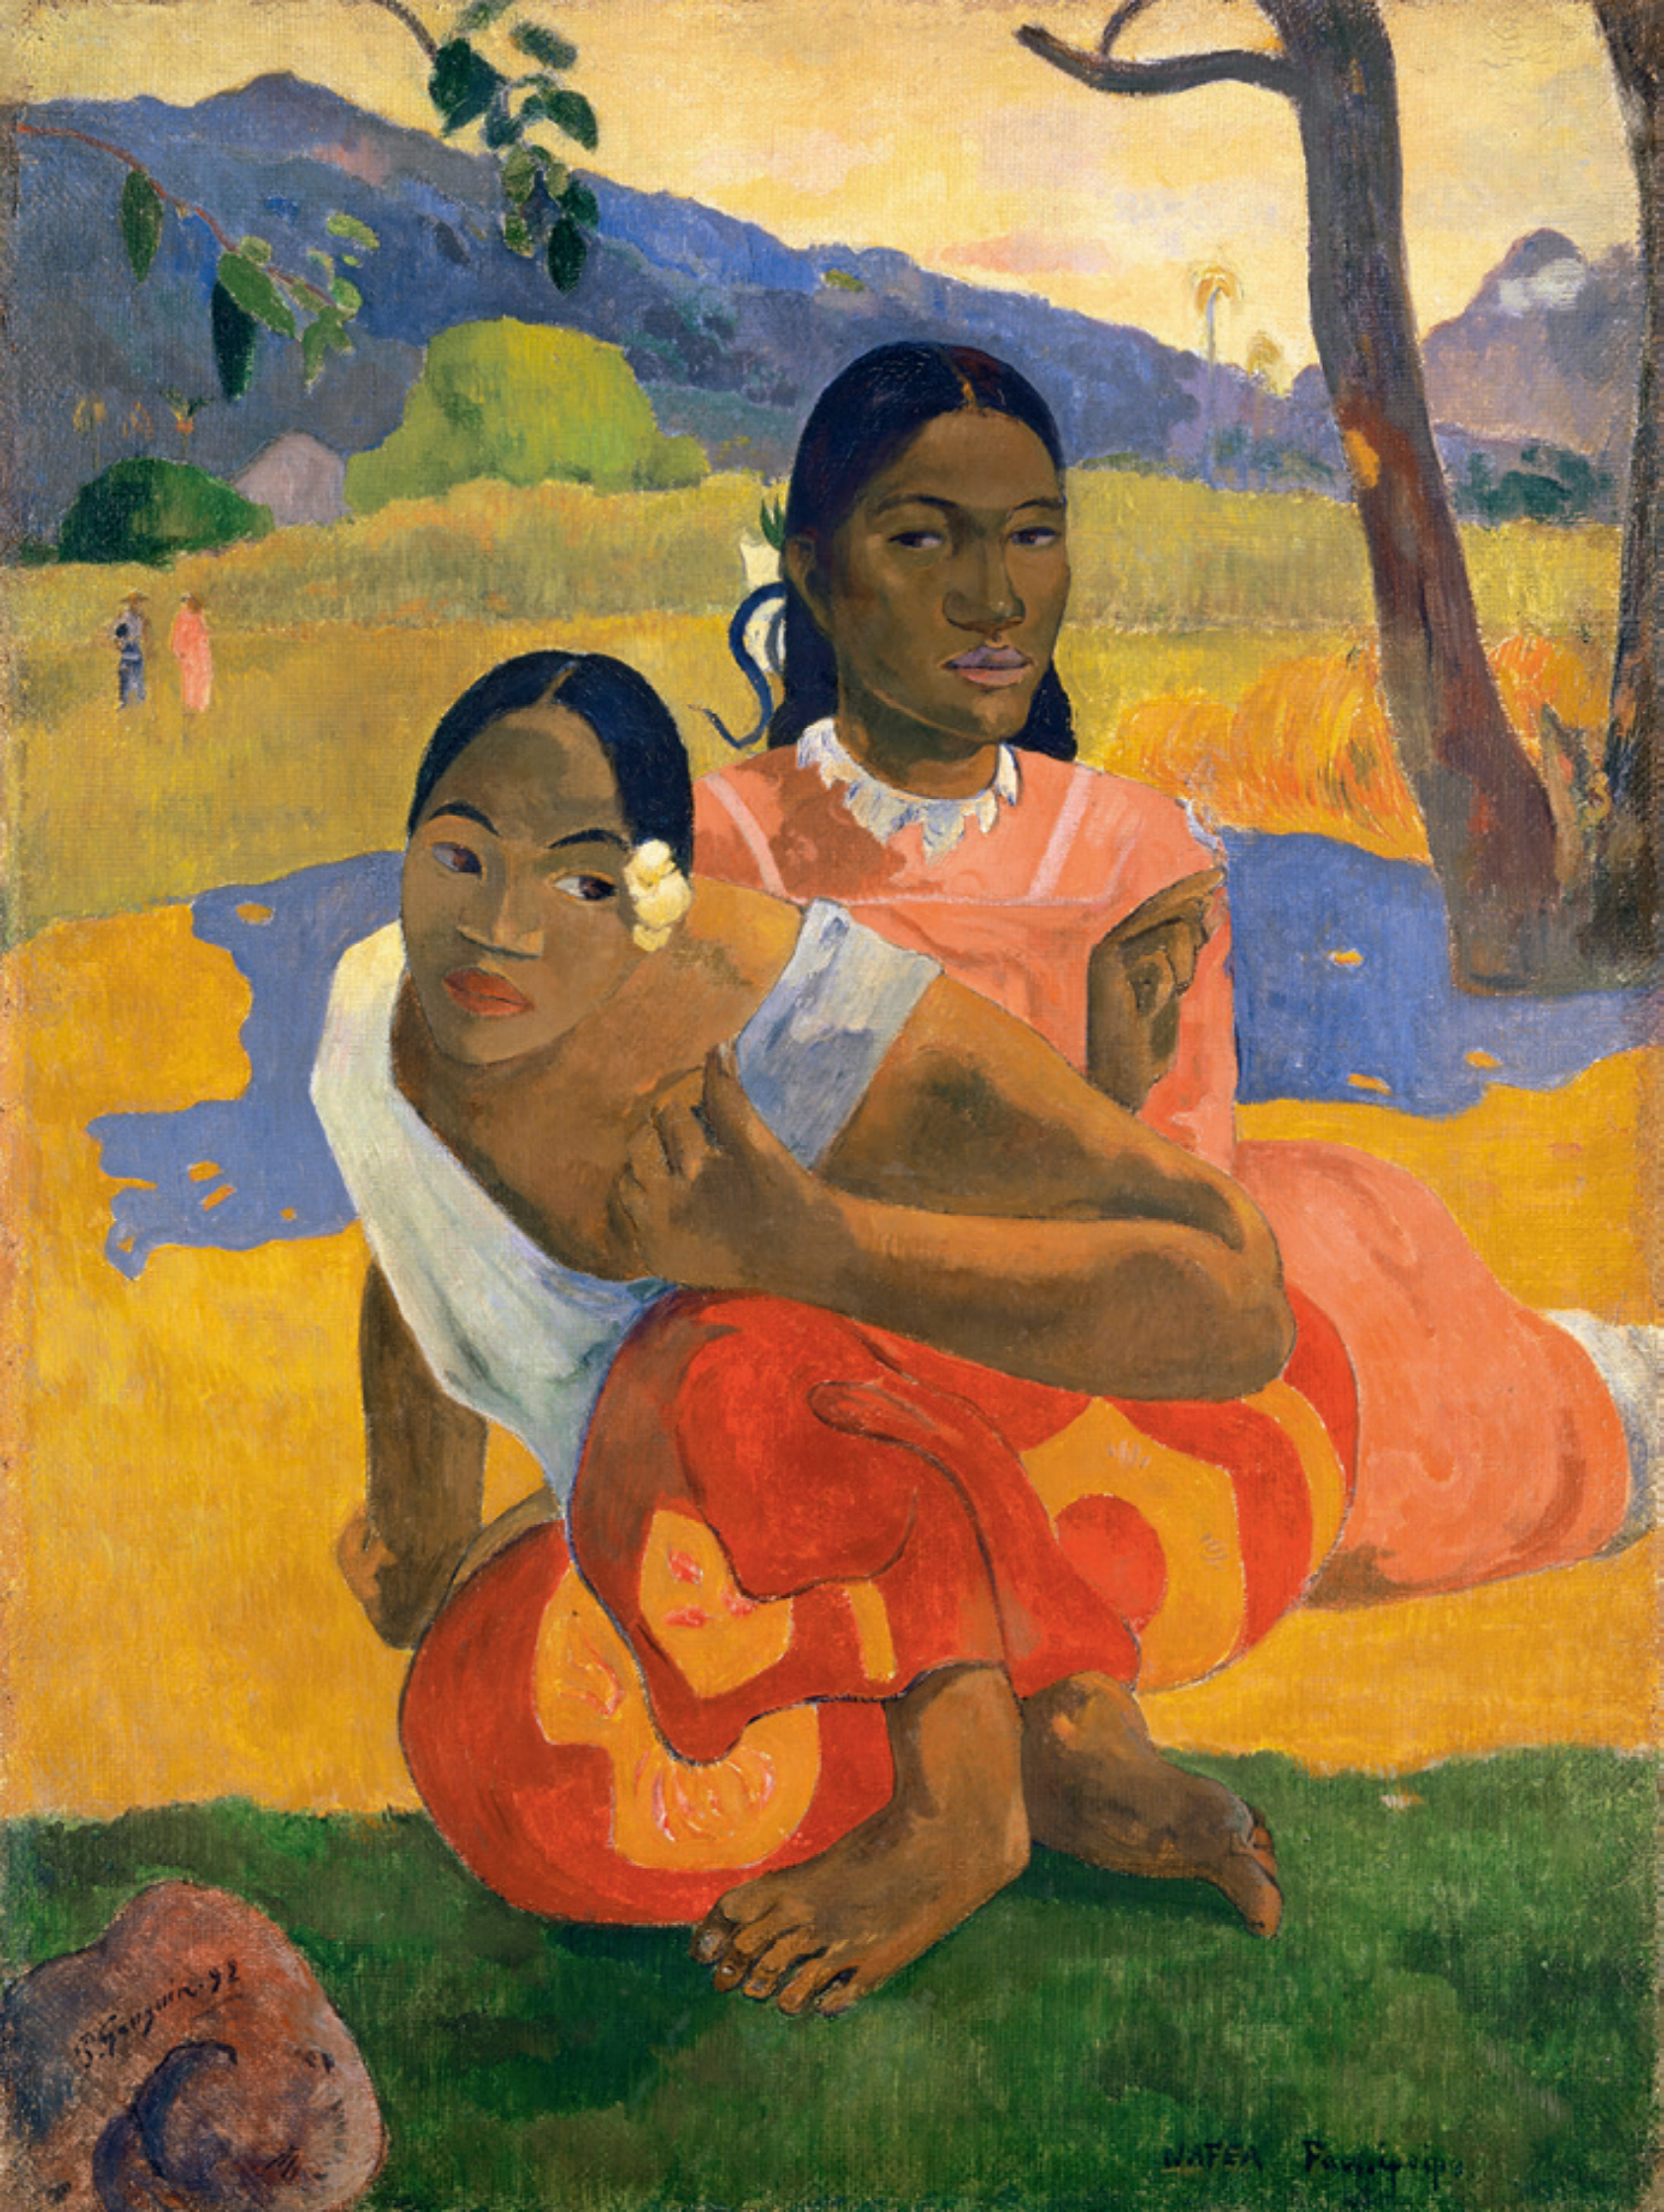 Paul_Gauguin%2C_Nafea_Faa_Ipoipo%3F_%28When_Will_You_Marry%3F%29_1892%2C_oil_on_canvas%2C_101_x_77_cm.jpg